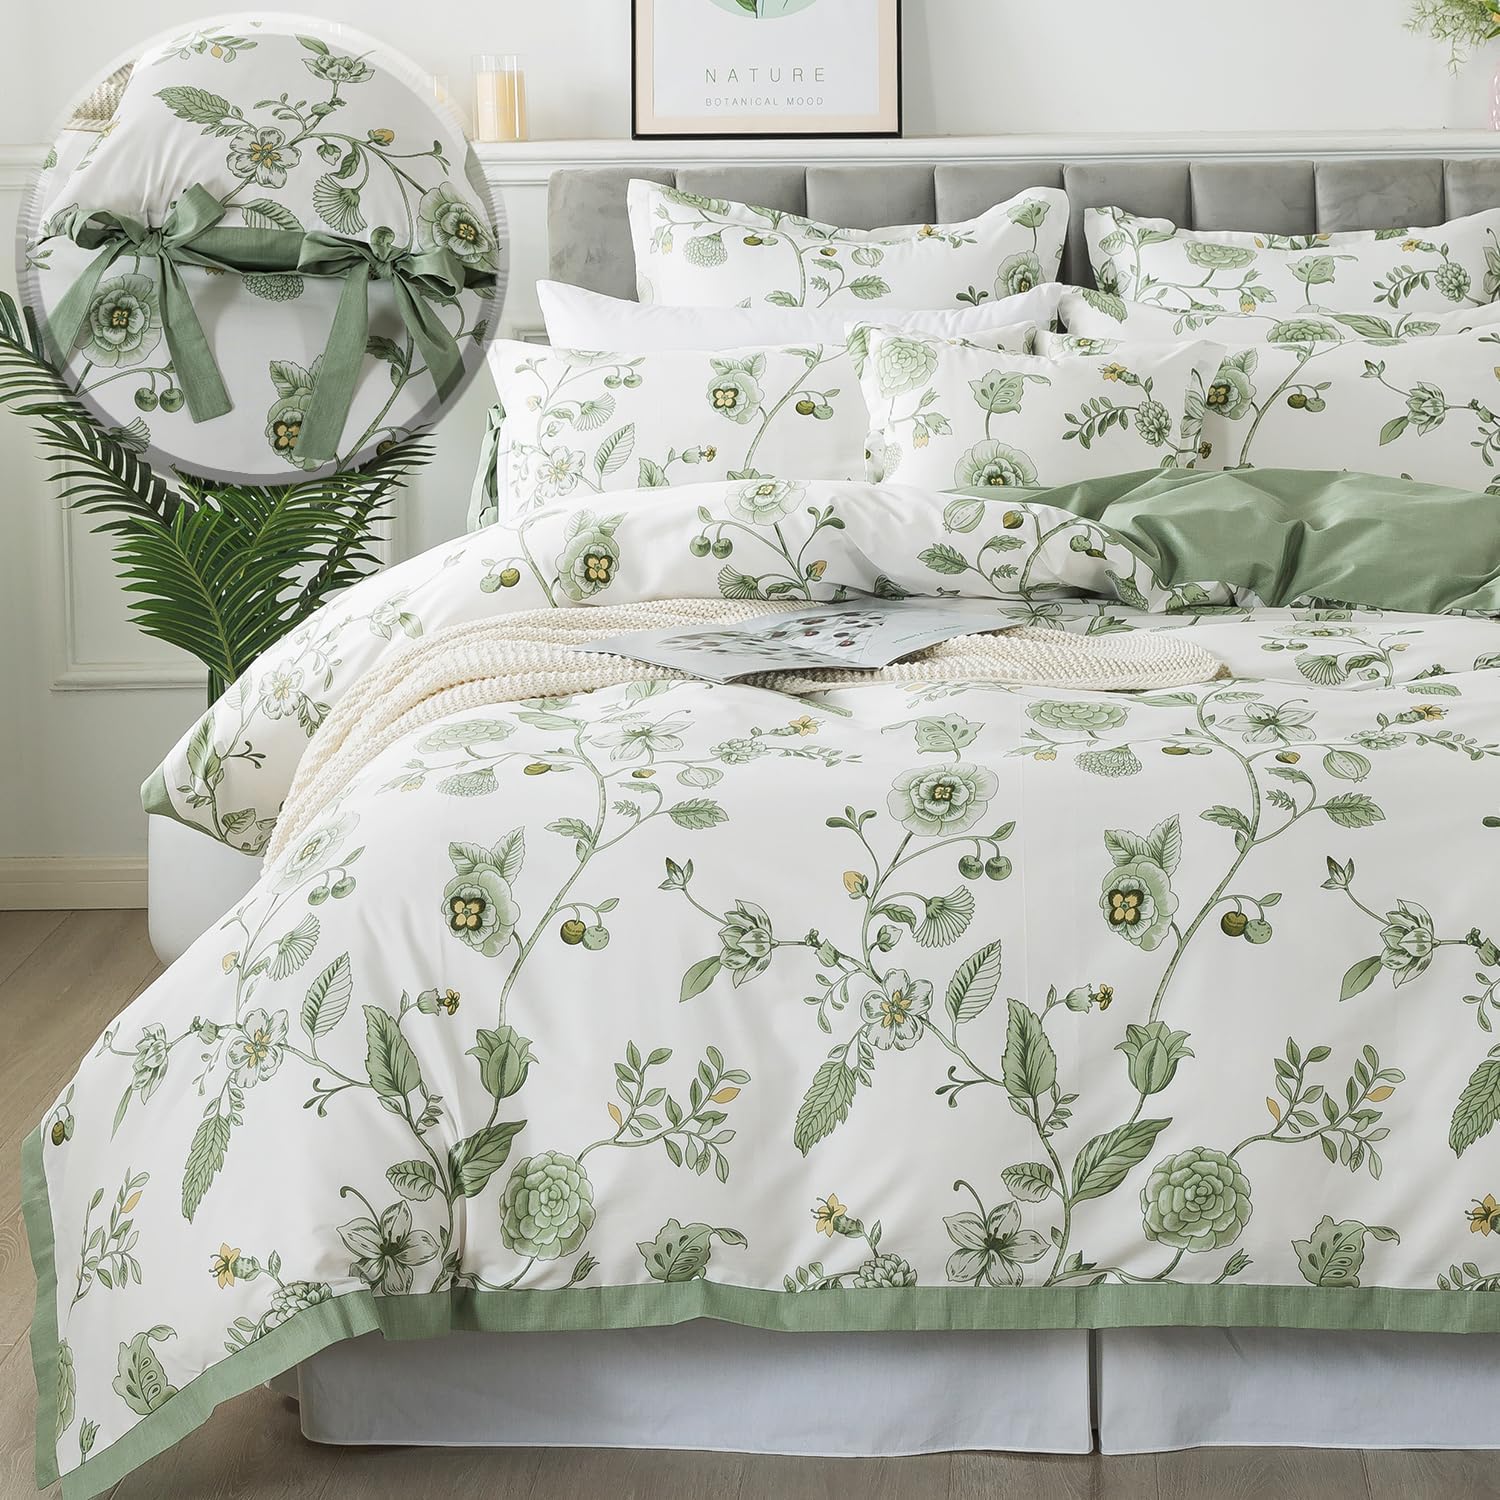 FADFAY Green Duvet Cover Set Queen Floral Bedding 100% Cotton Shabby Vintage Reversible Zipper Farmhouse Comforter Cover Flower Print Bed Covers Girls Pretty Bowknot Soft Breathable 3Pcs